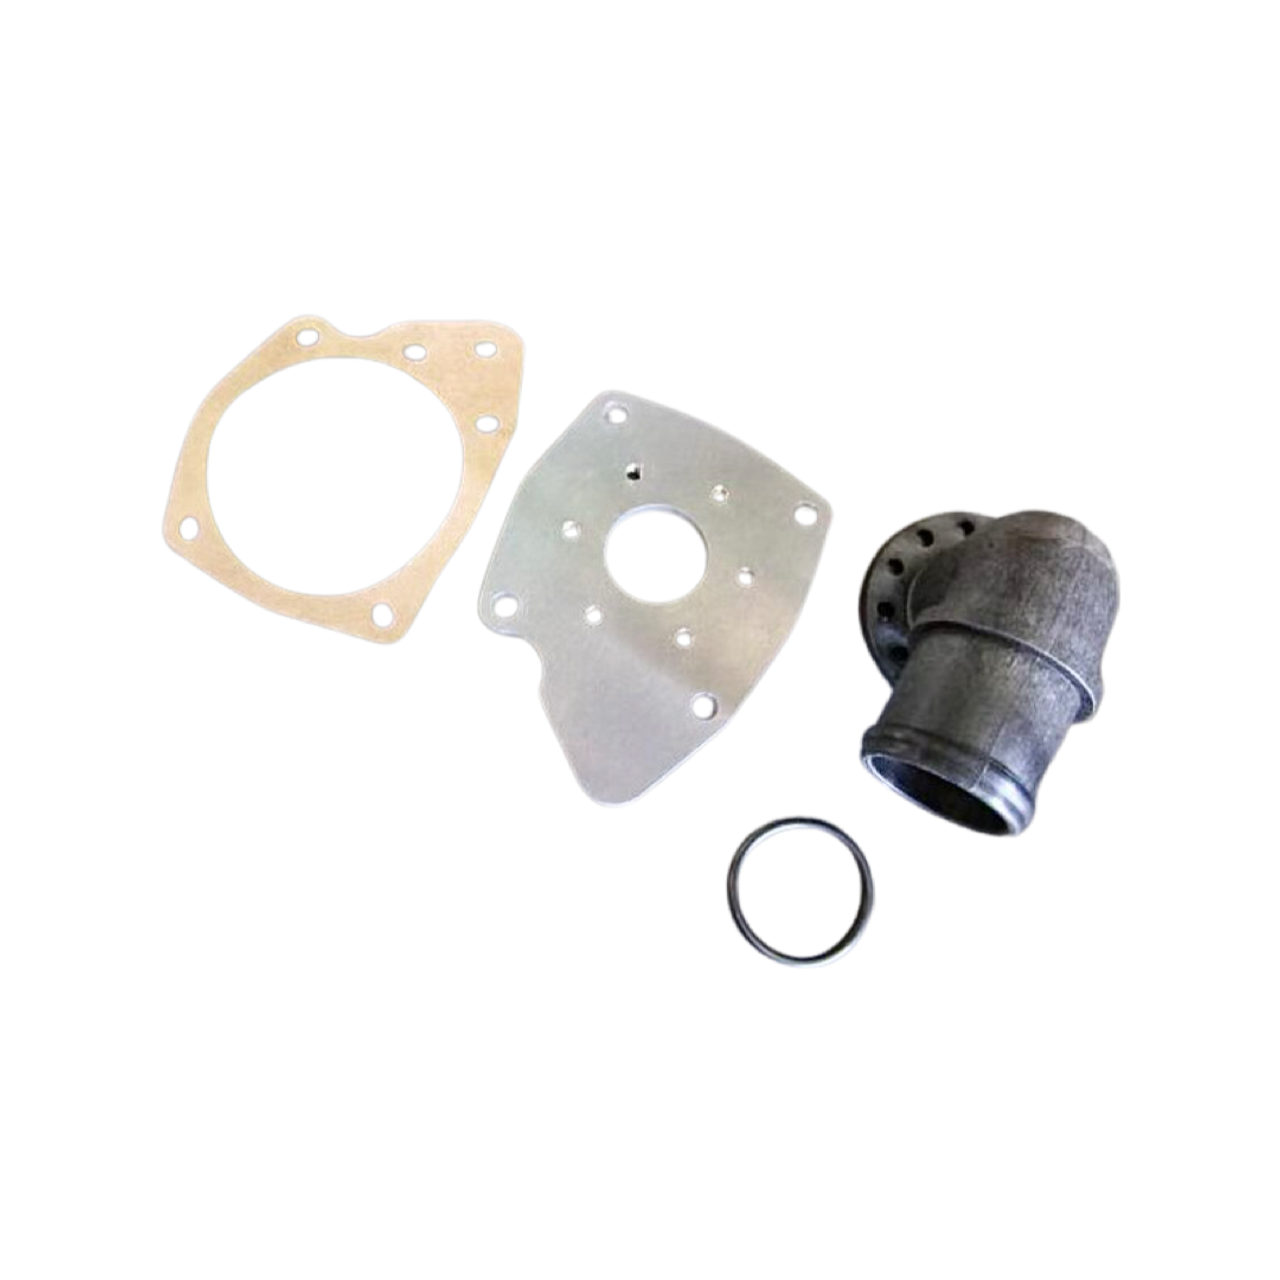 Water Pump Block-off Kit to be used with Electric Water Pump
FIAT 124 Spider, Sport Coupe, Spider 2000, Pininfarina - 1966-1985 - Auto Ricambi